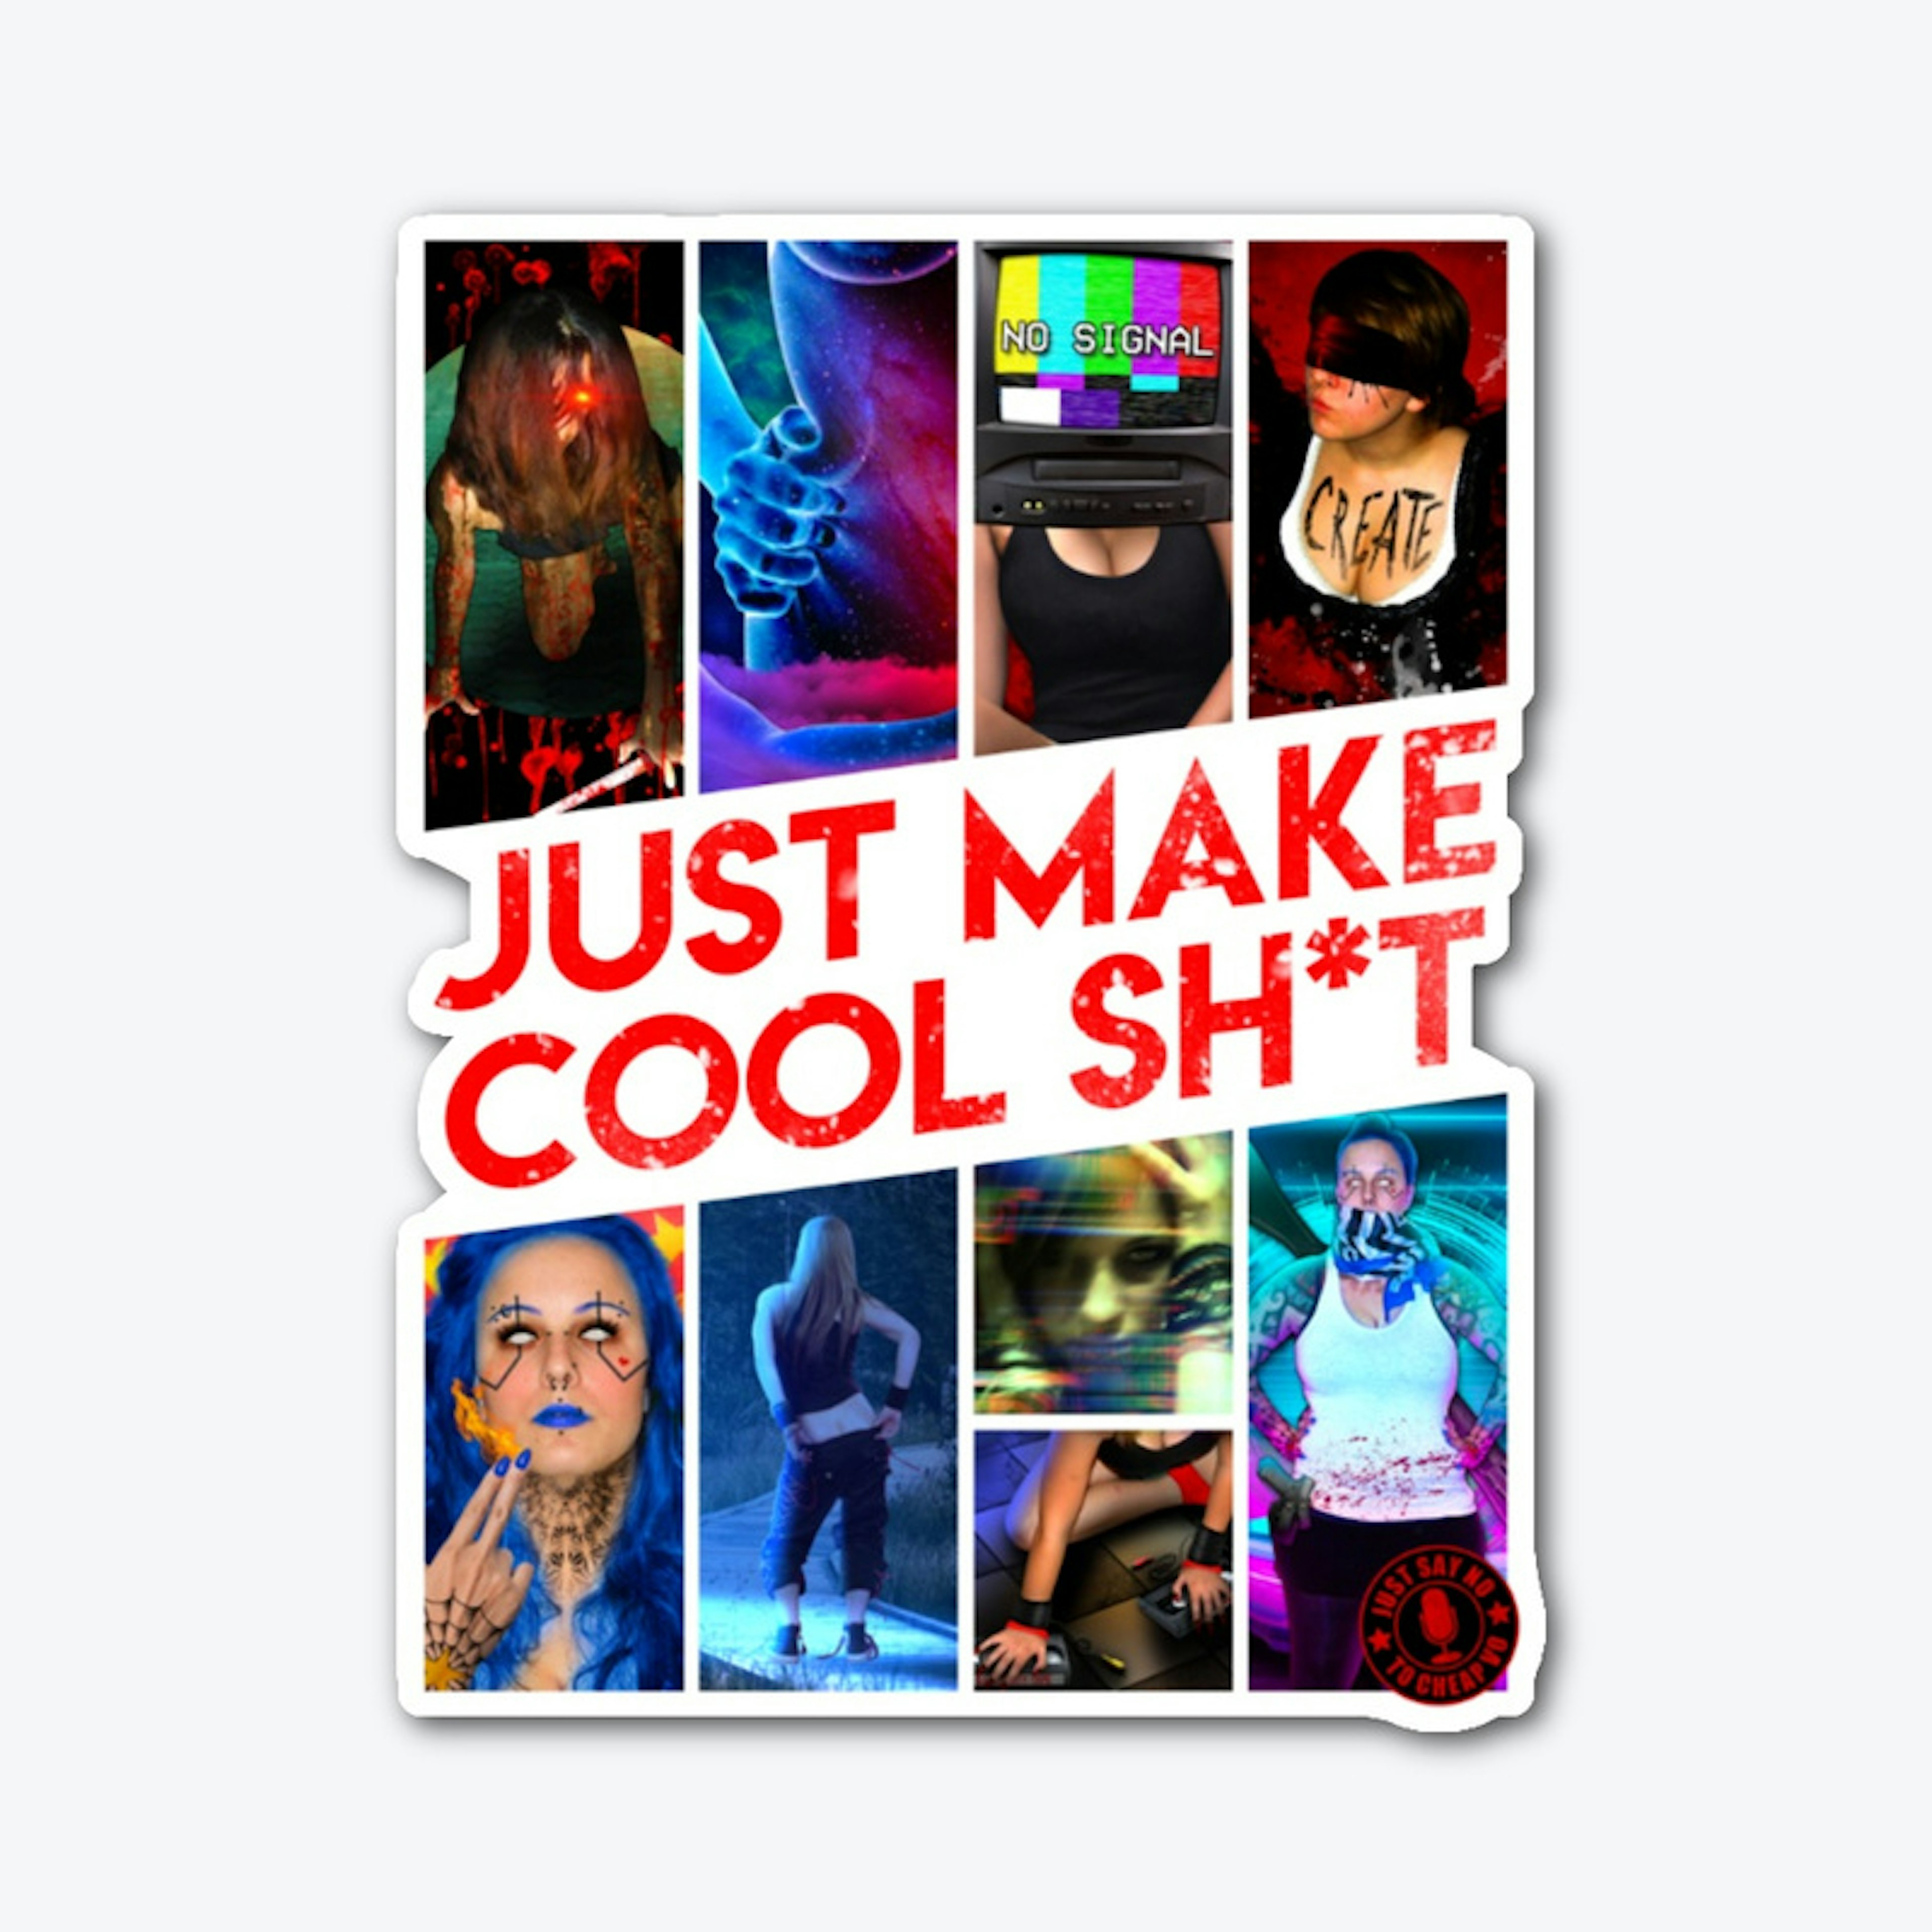 Just Make Cool Sh*t